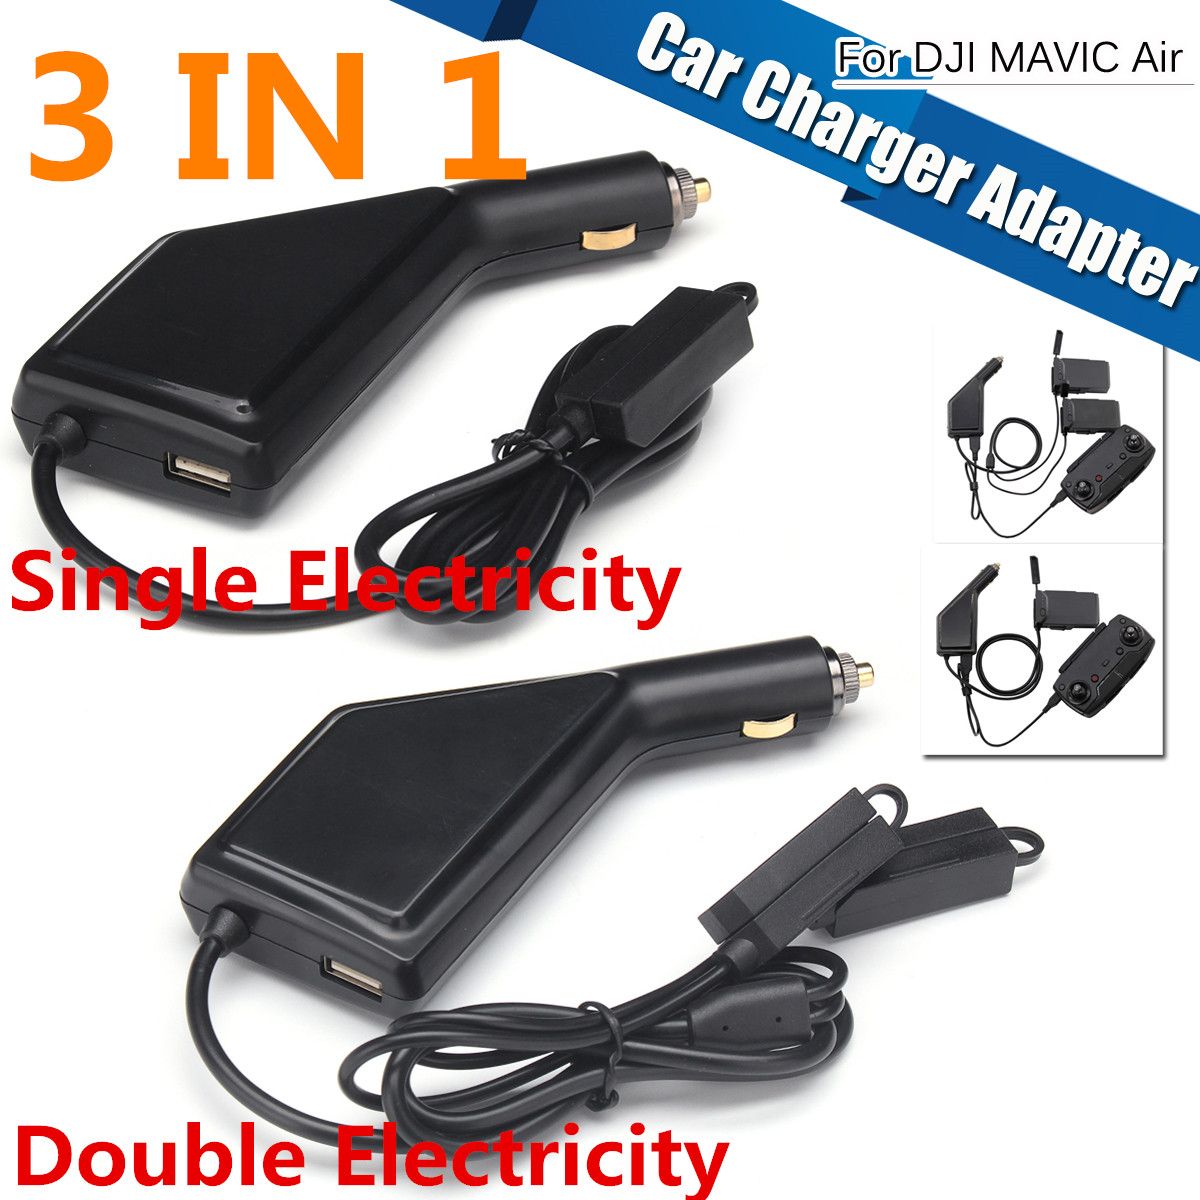 3-IN1-Car-Charger-Charging-Hub-Adapter-Remote-Control-Battery-for-DJI-MAVIC-Air-1286728